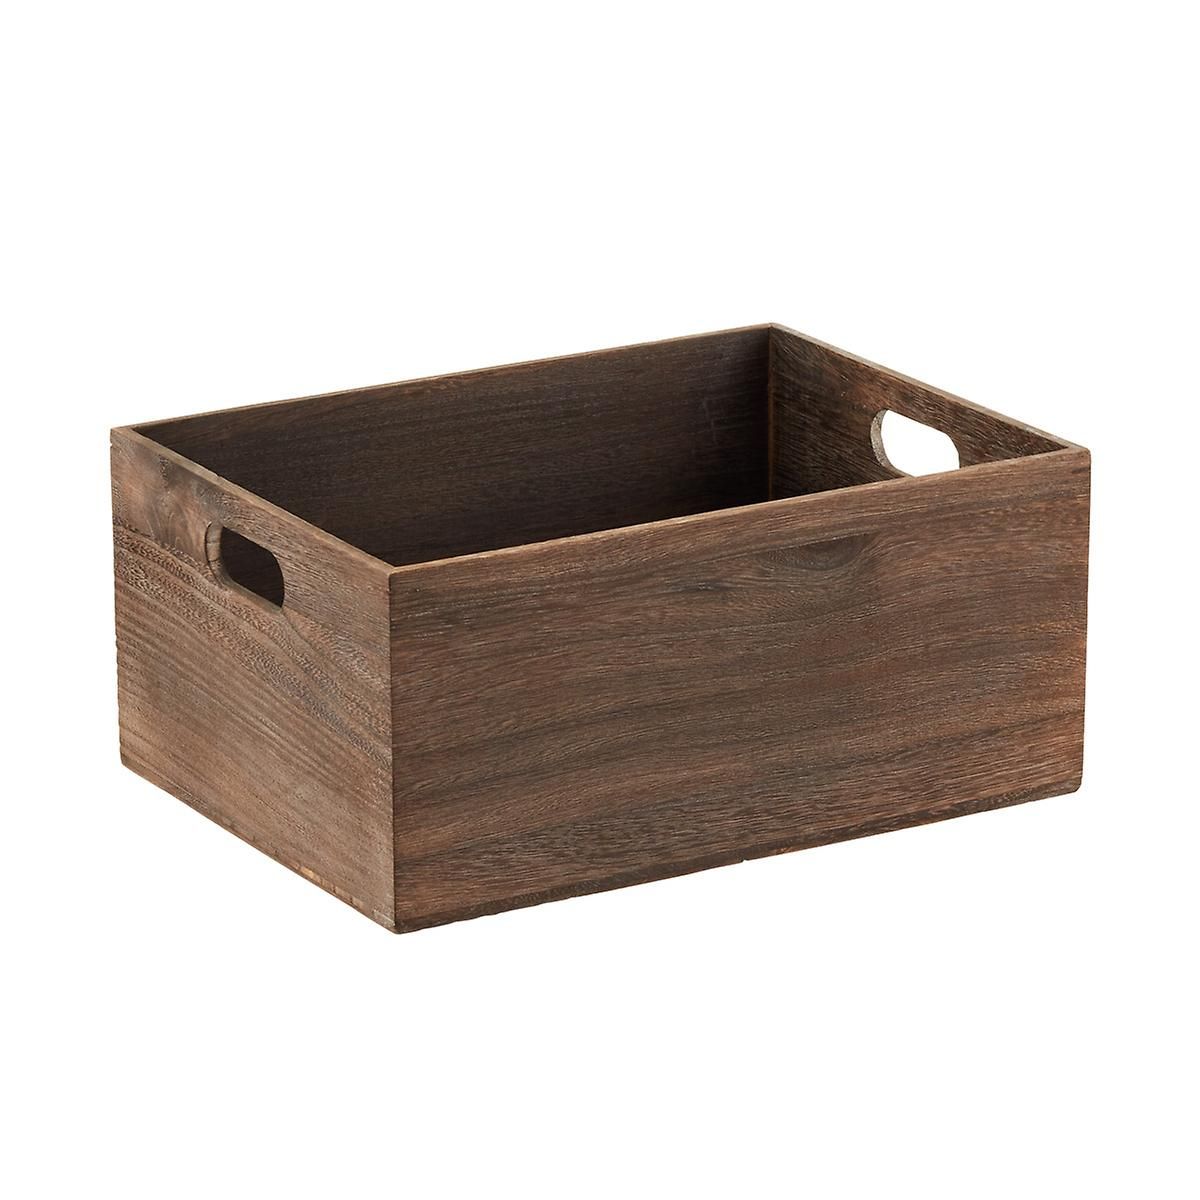 Feathergrain Wooden Storage Bins with Handles | The Container Store